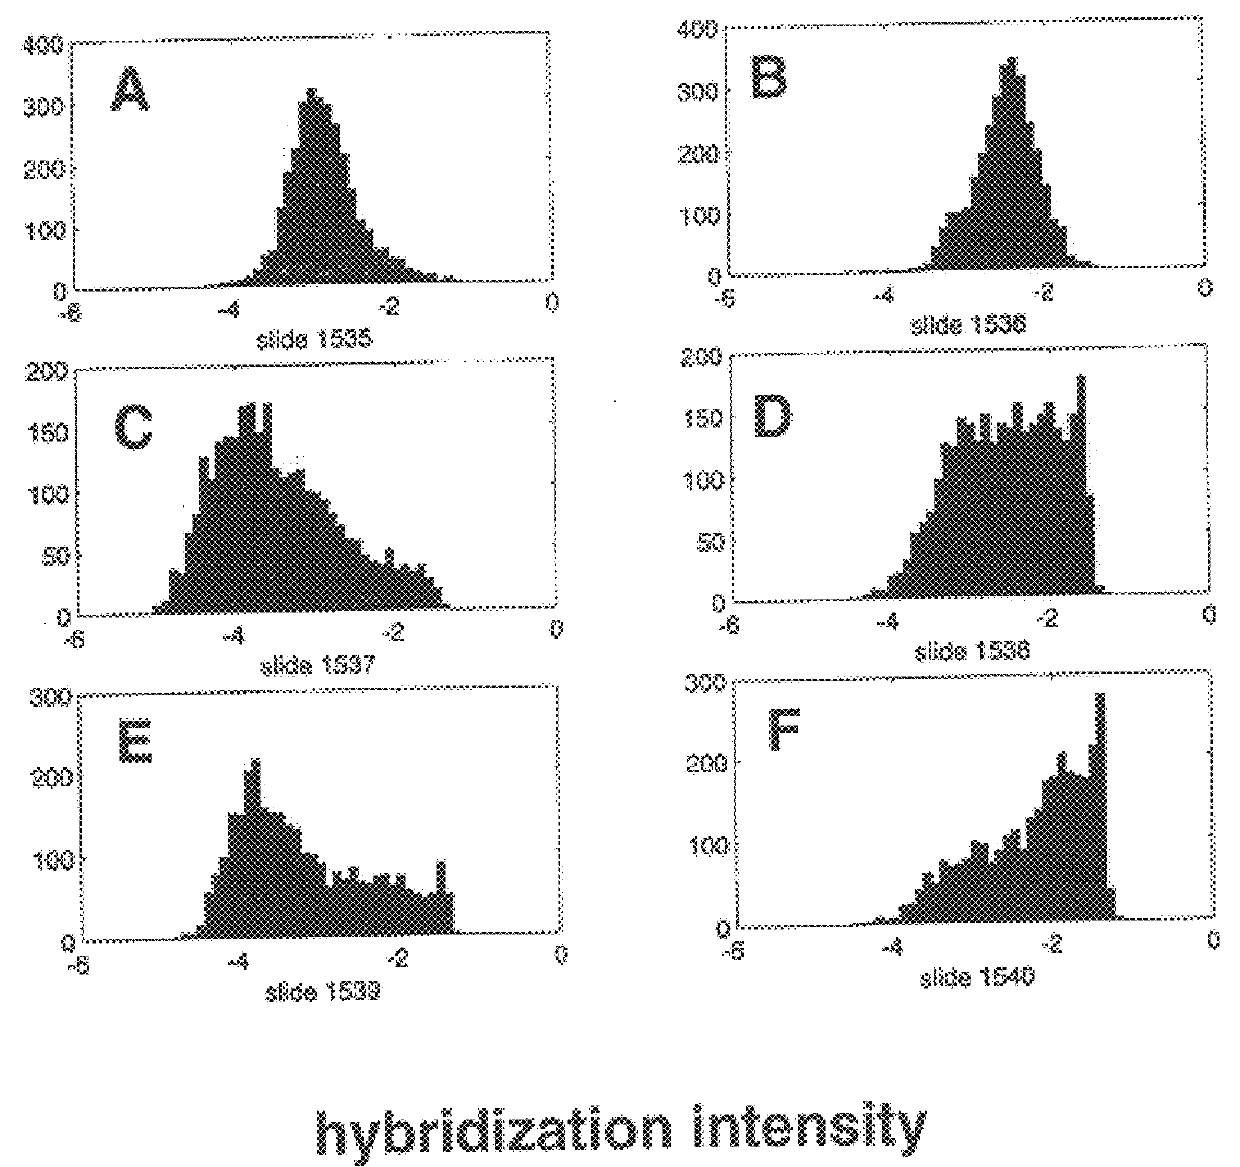 Monitoring of gene expression by detecting hybridization to nucleic acid arrays using anti-heteronucleic acid antibodies